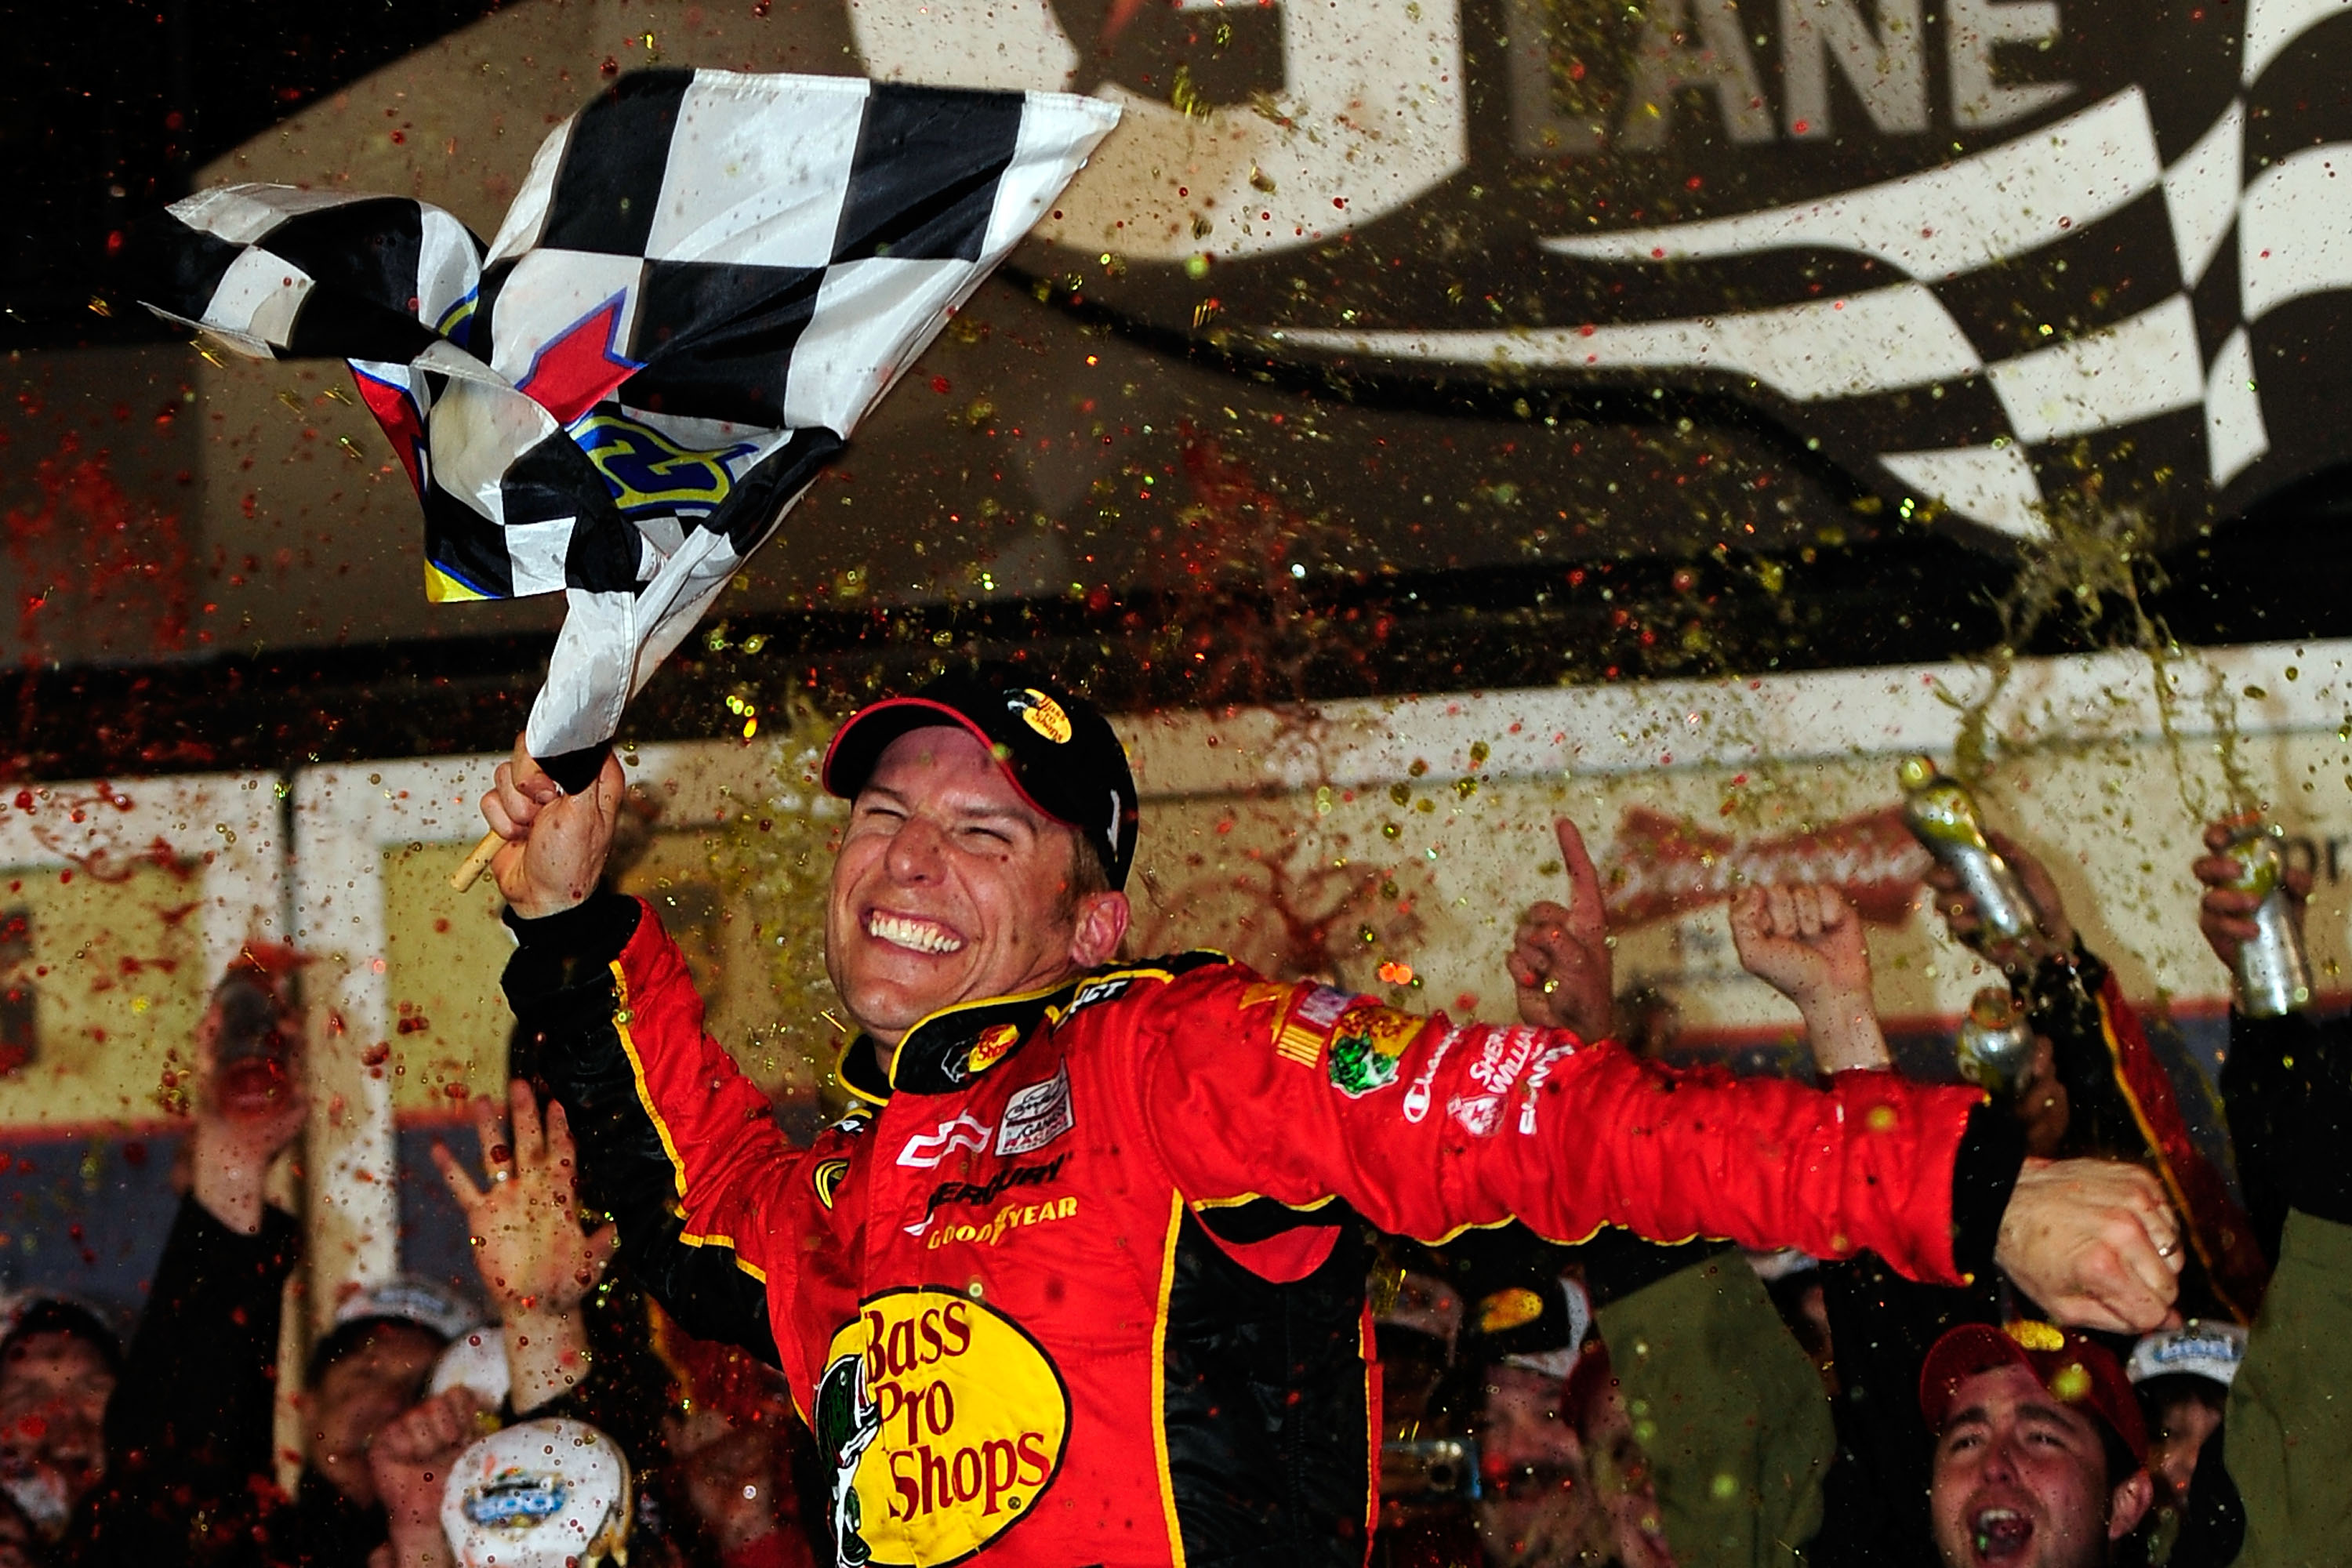 Jamie McMurray won three races in 2011 with his new Bass Pro Shops team.